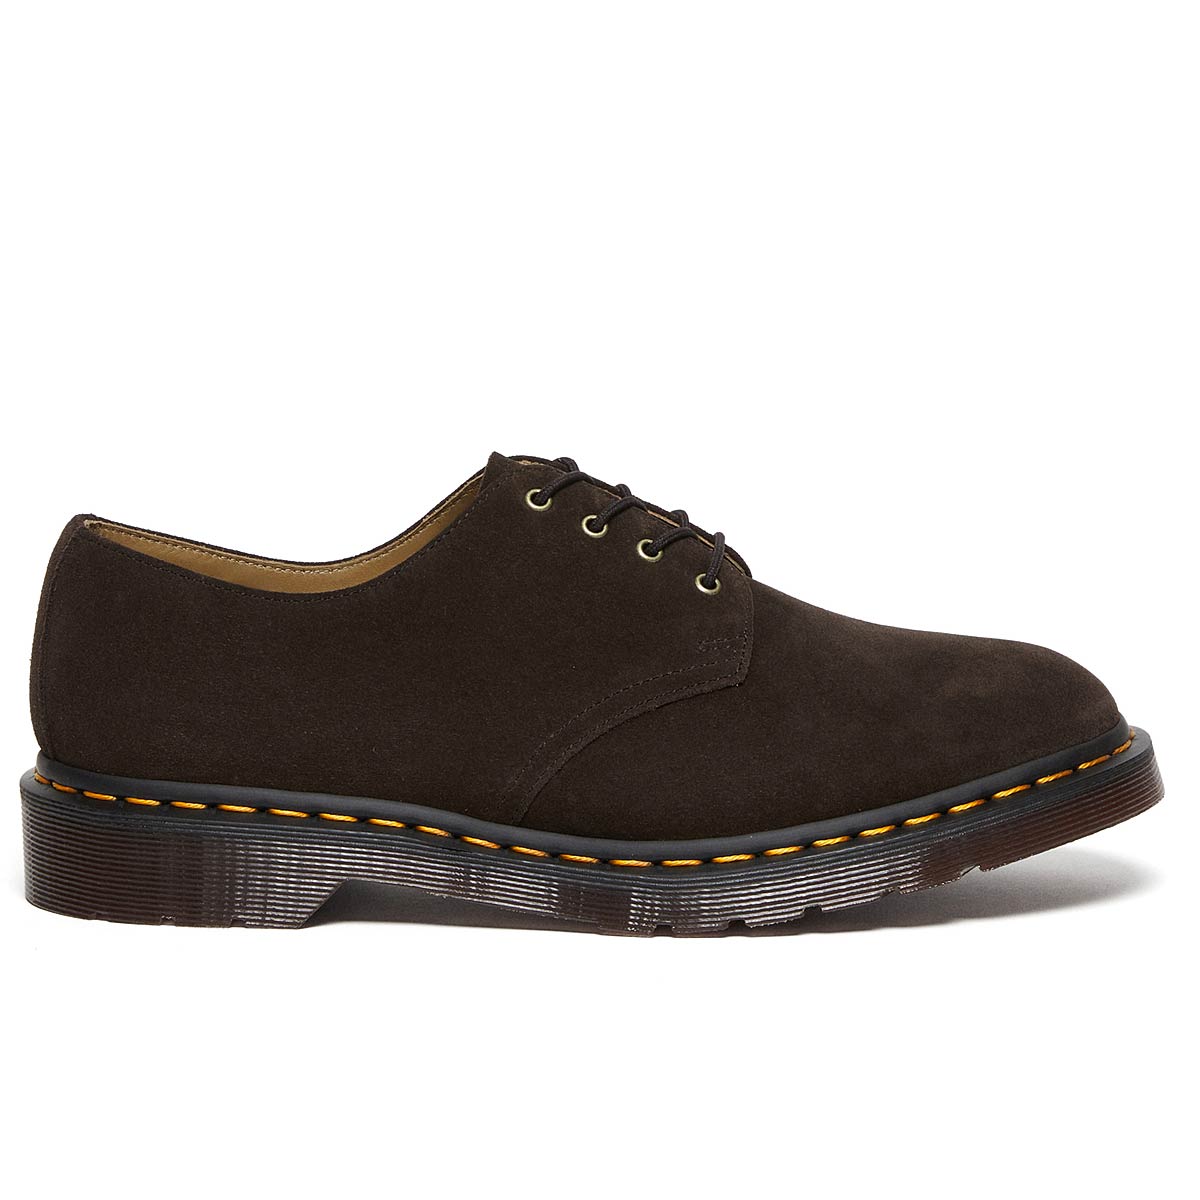 Dr. Martens Smiths, Chocolate